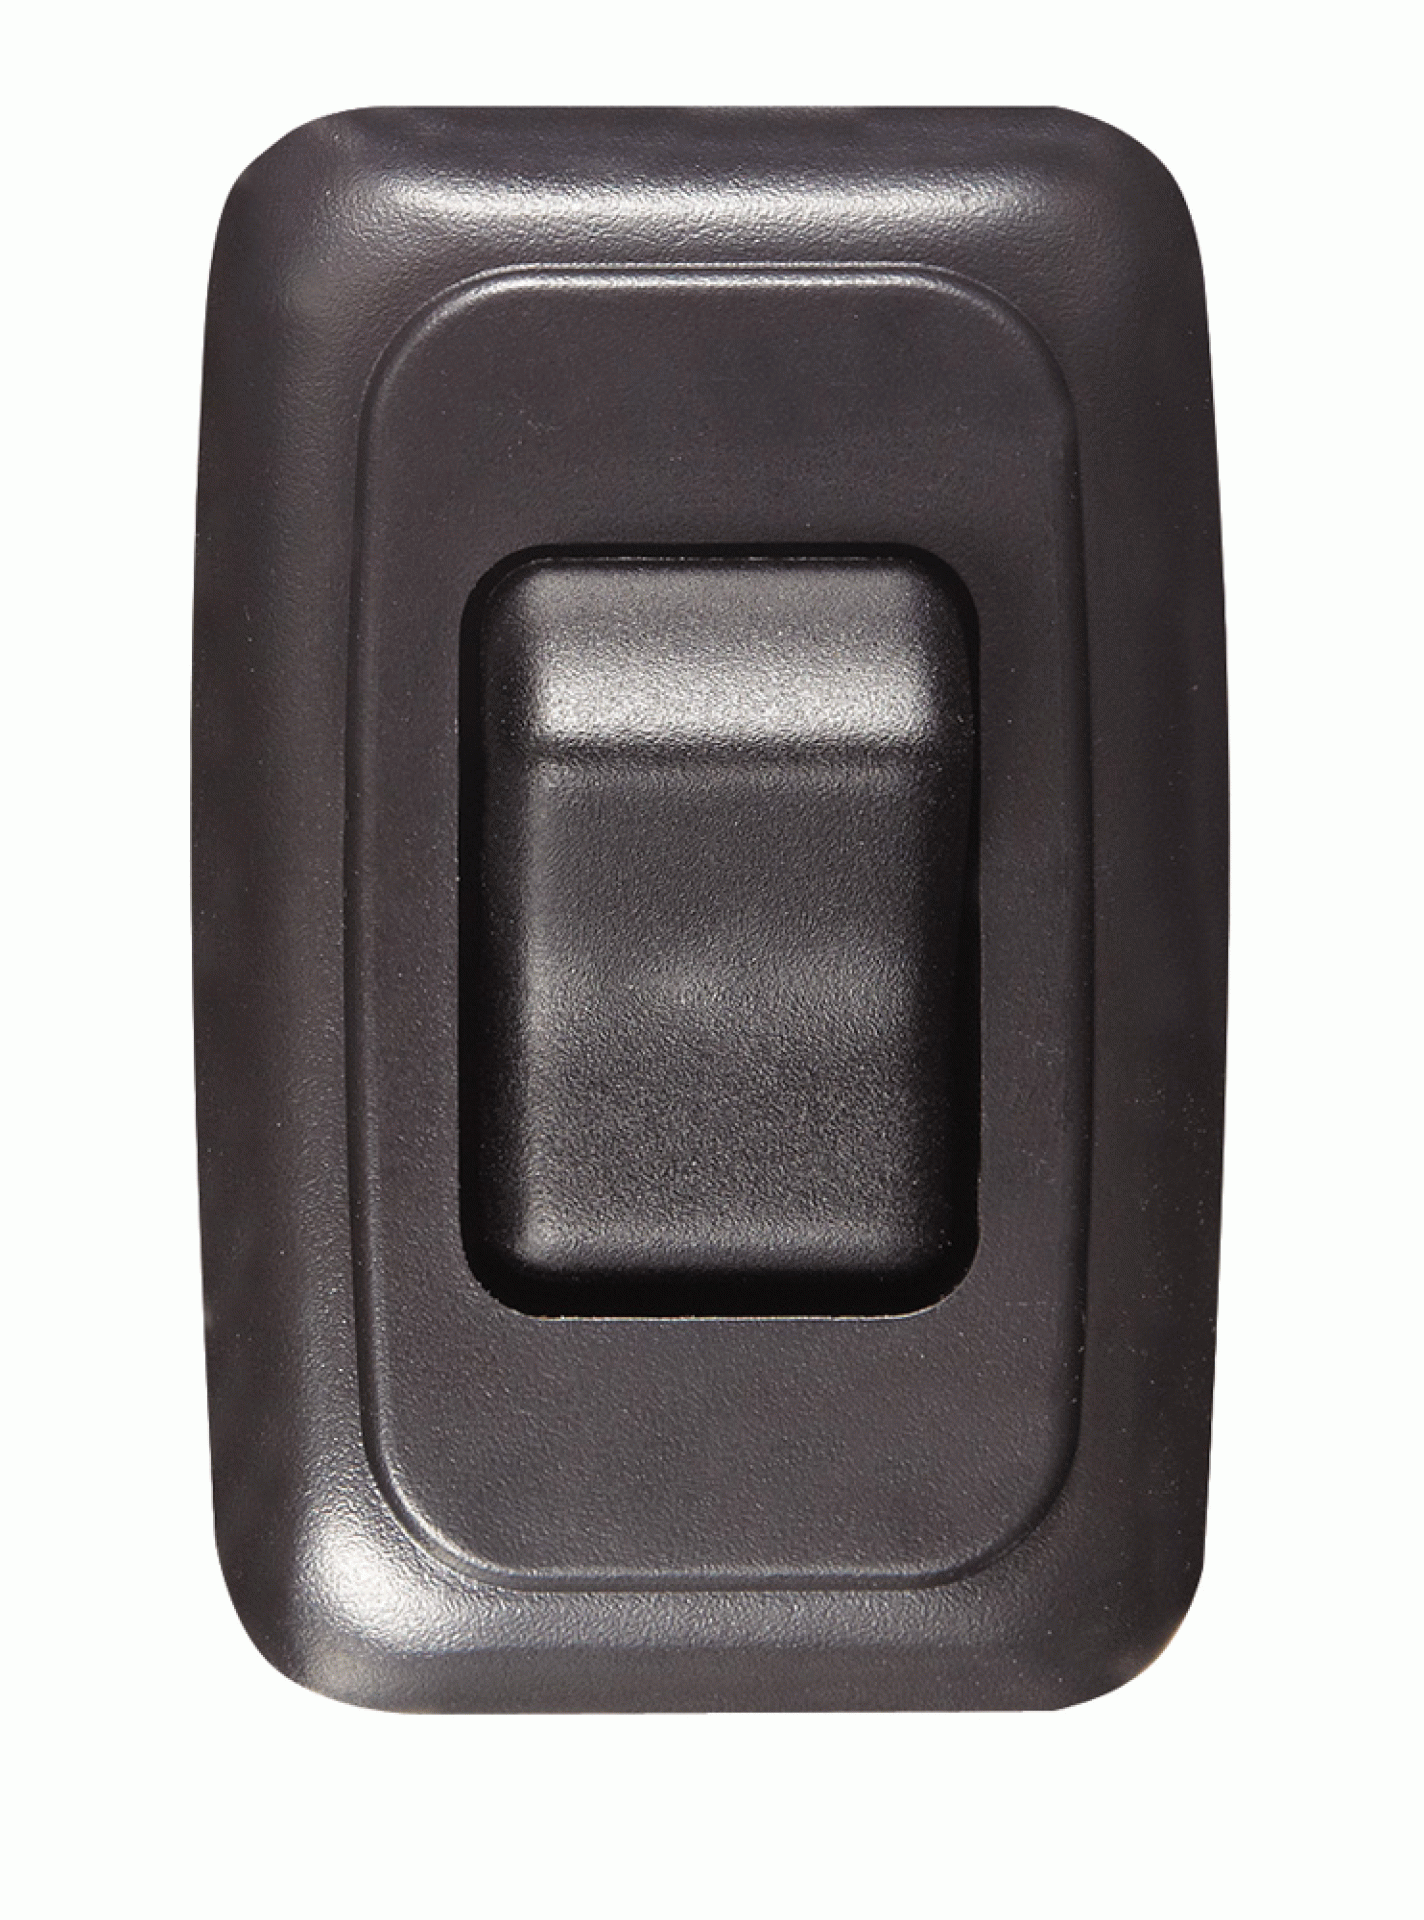 RV DESIGNER COLLECTION | S521 | Contoured Wall Switch Black Single On/Off SPST